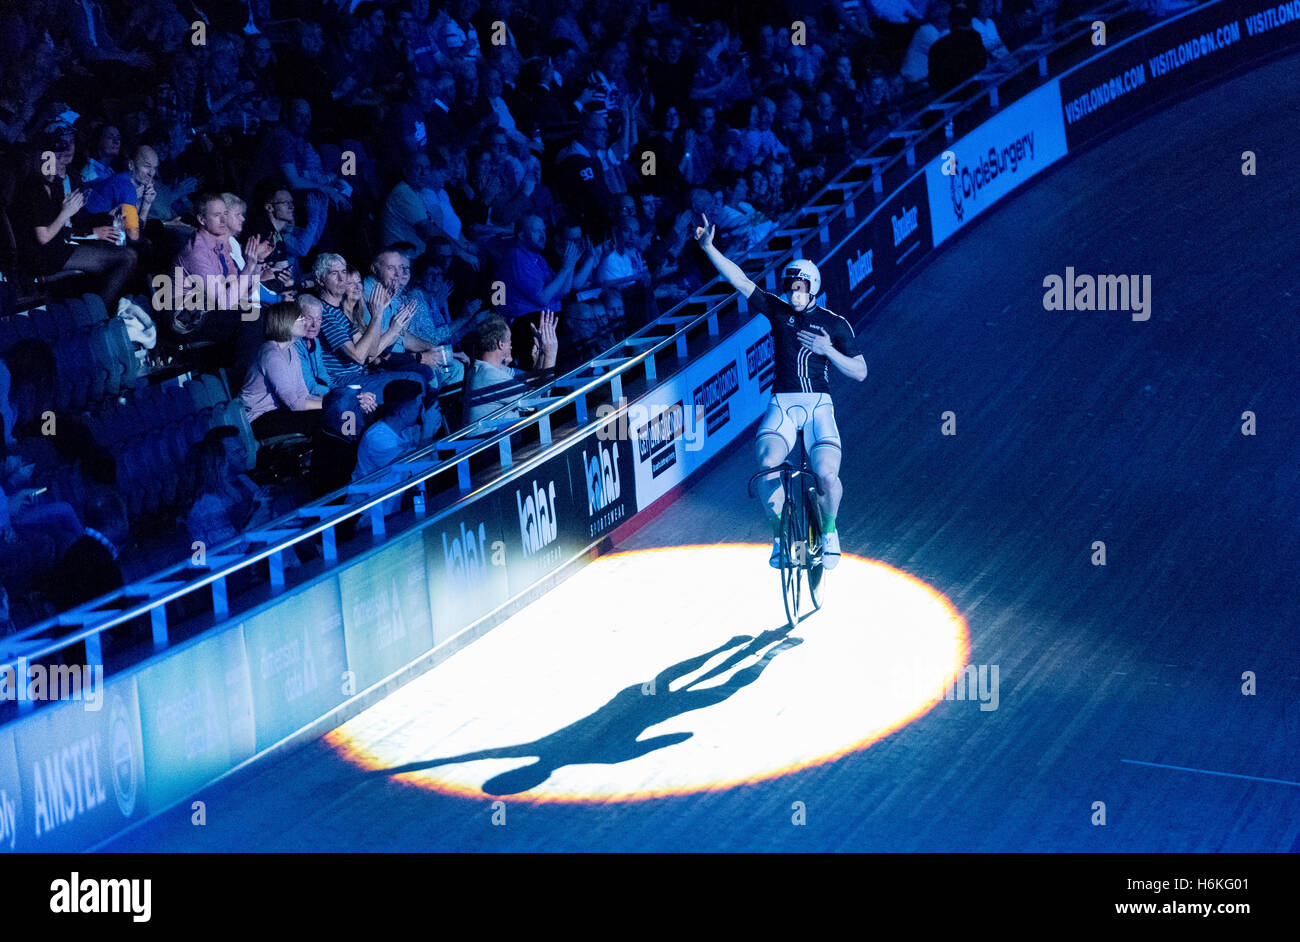 London, UK, 30 October 2016. Winner of the 200m Flying TT Sprinters Joachim Eilers, celebrating the win at Six Day London. Credit: pmgimaging/Alamy Live News Stock Photo